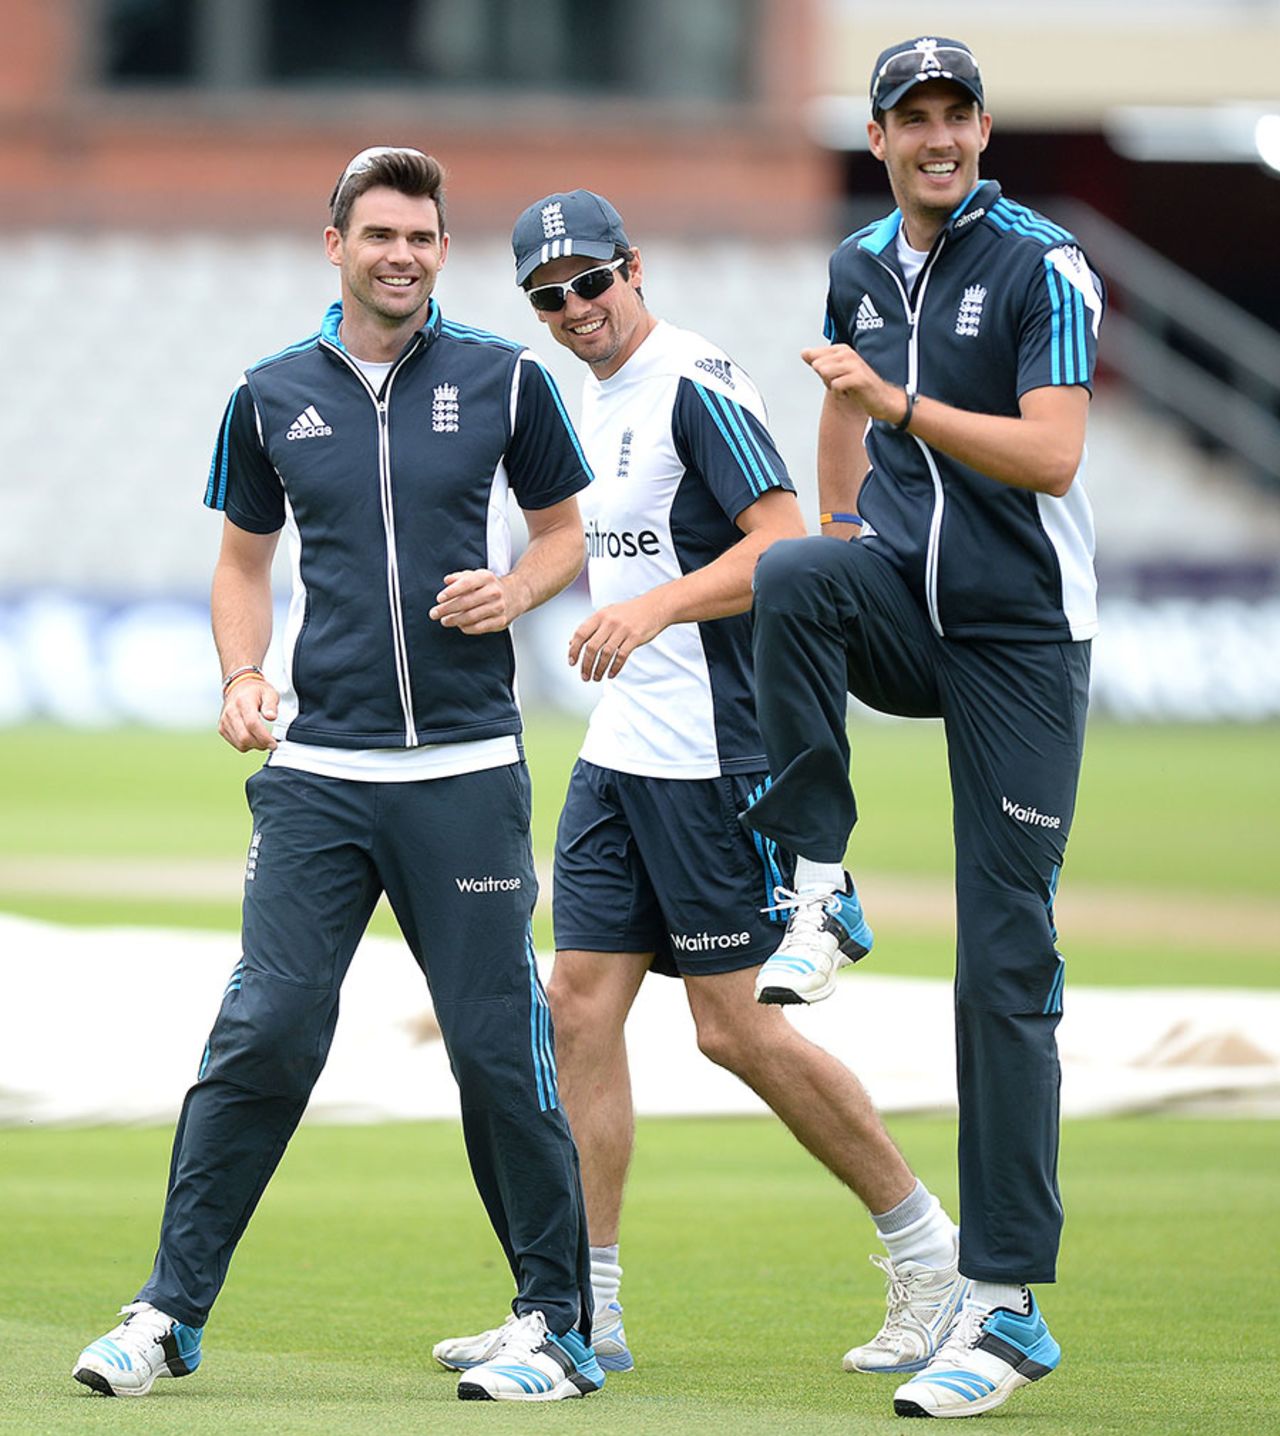 Steven Finn was back among the England squad, Old Trafford, August 4, 2014